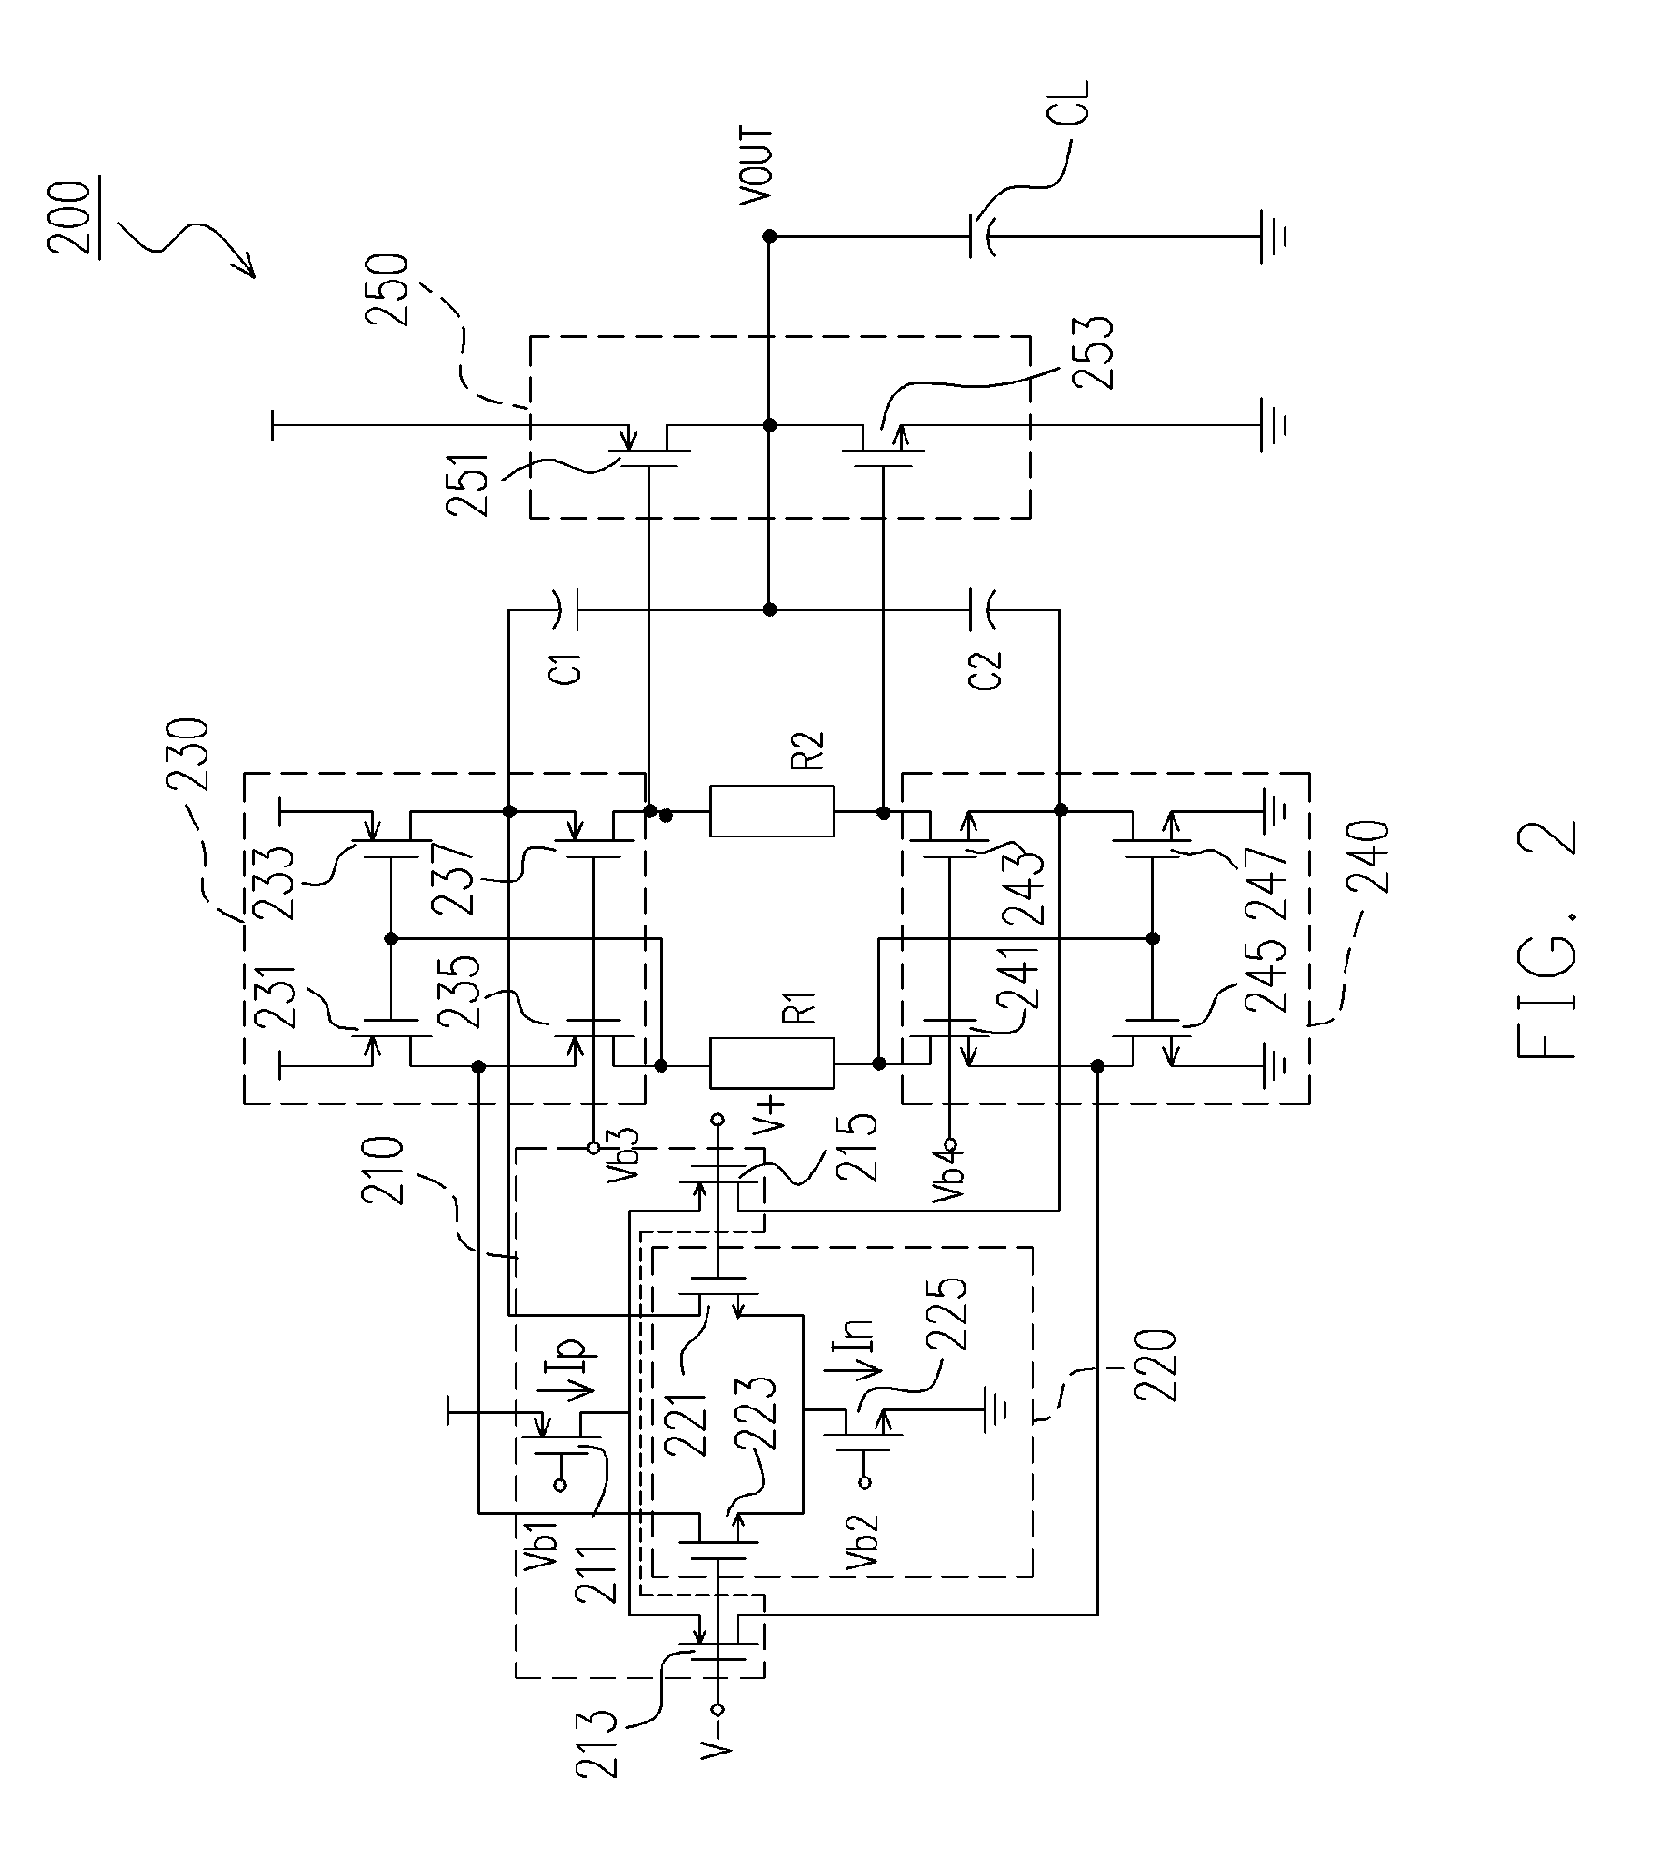 Apparatus and method for increasing a slew rate of an operational amplifier